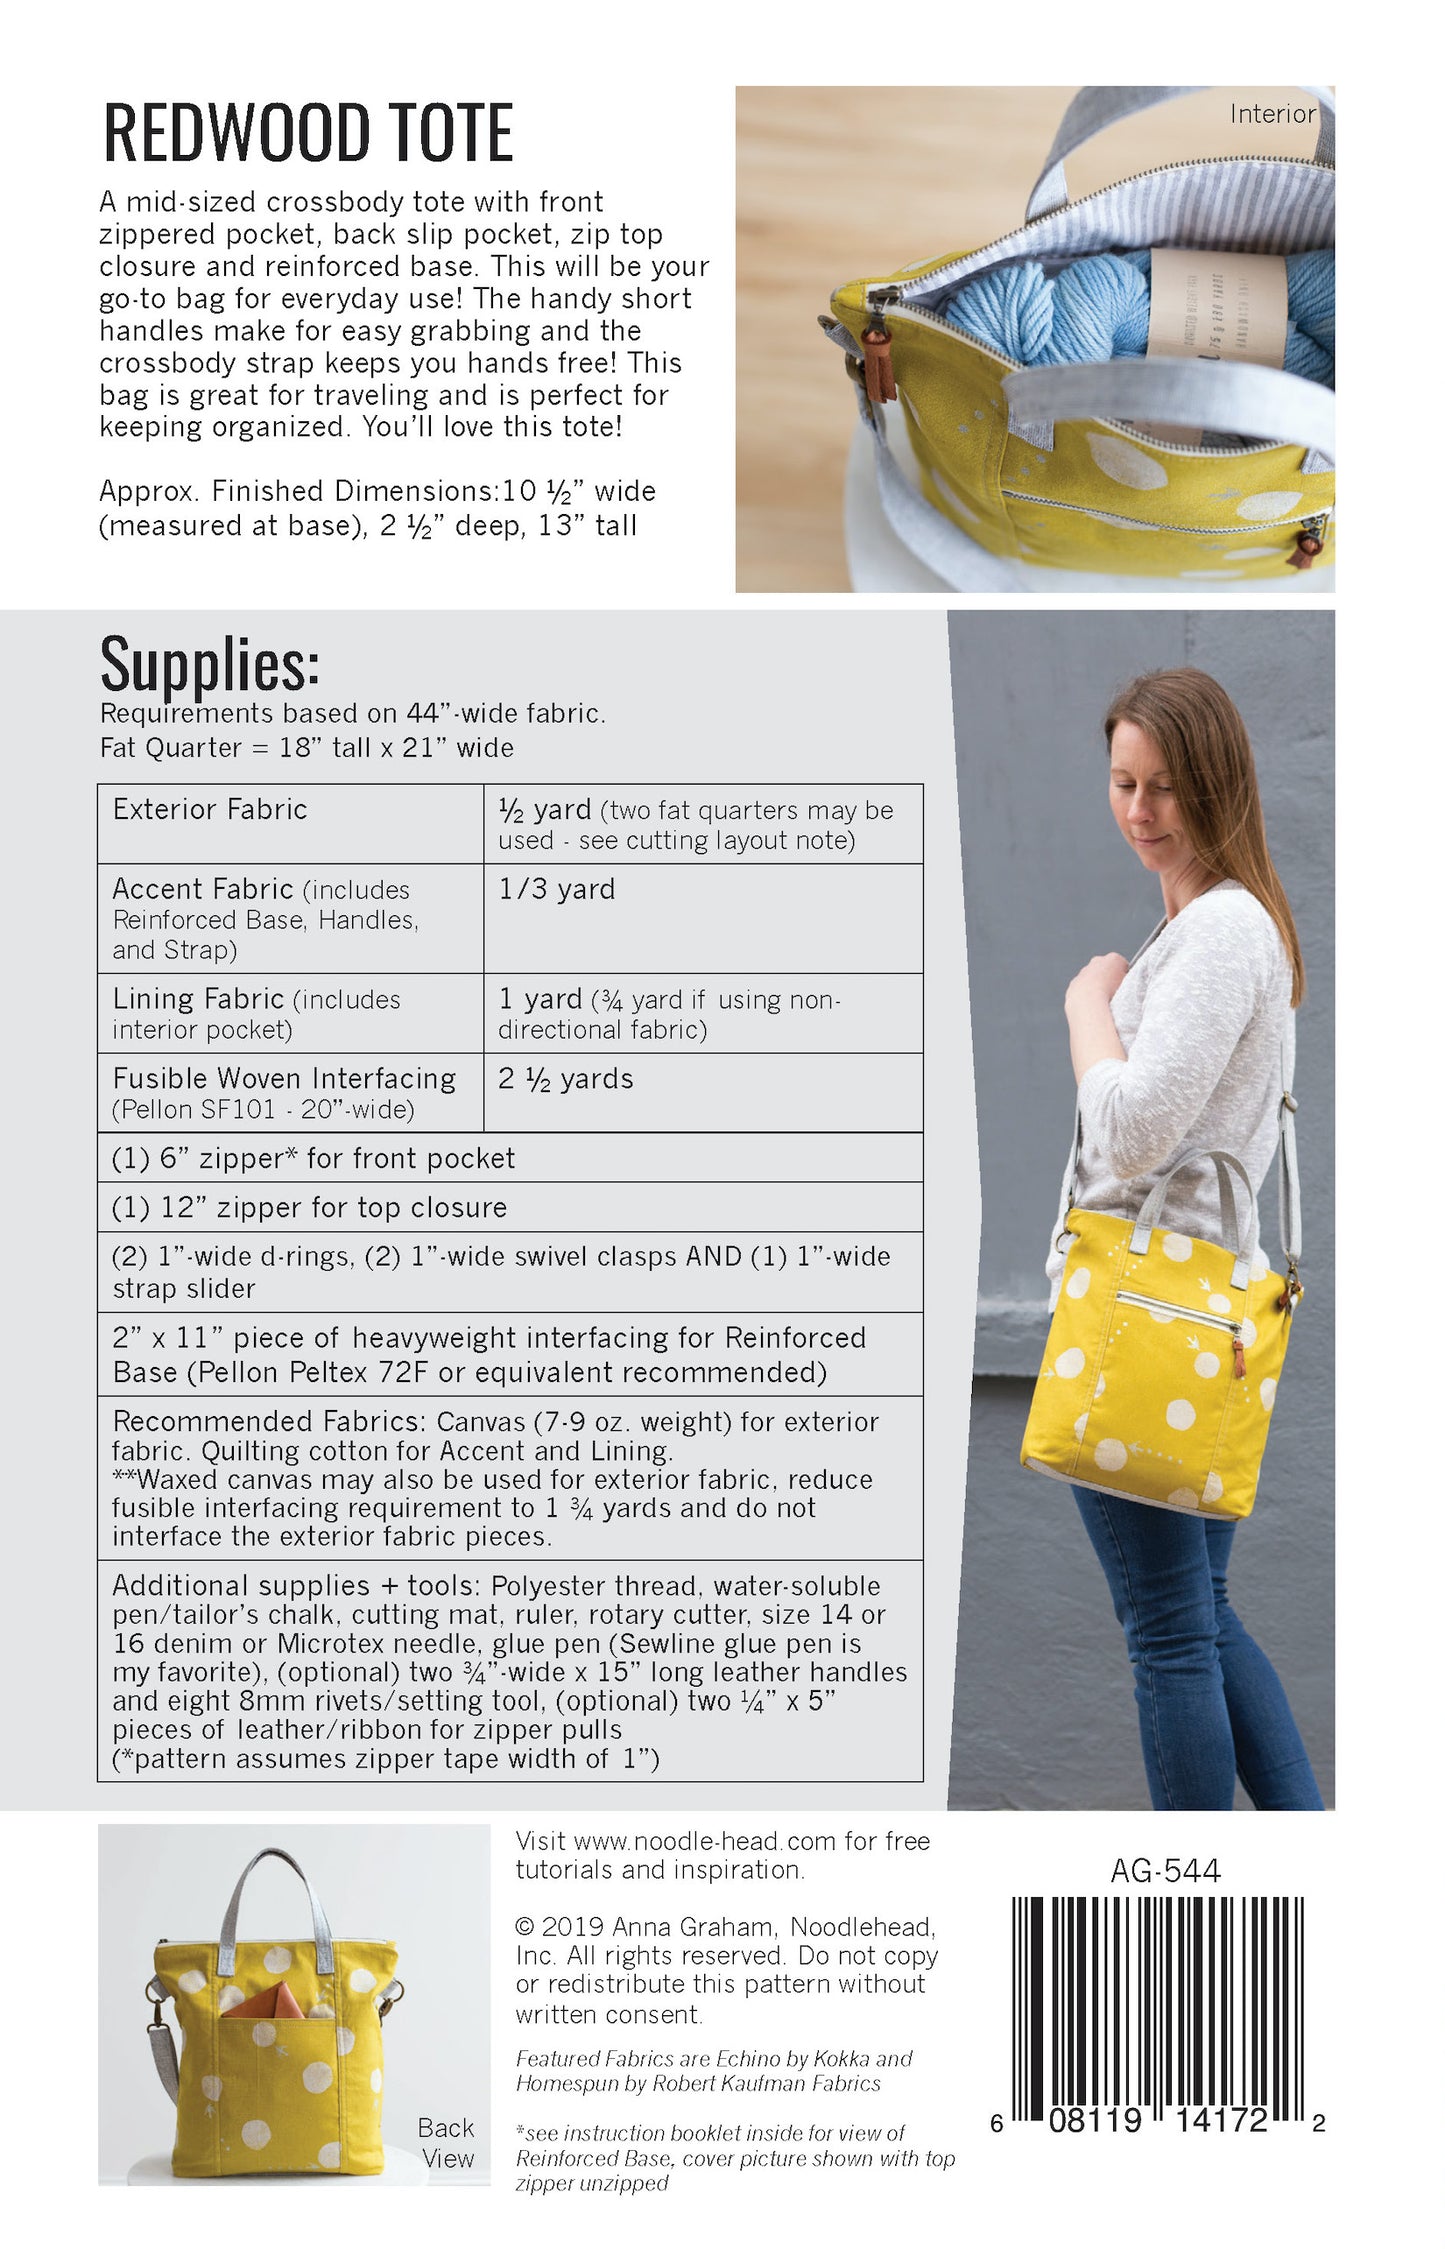 Redwood Tote Sewing Pattern by Noodlehead